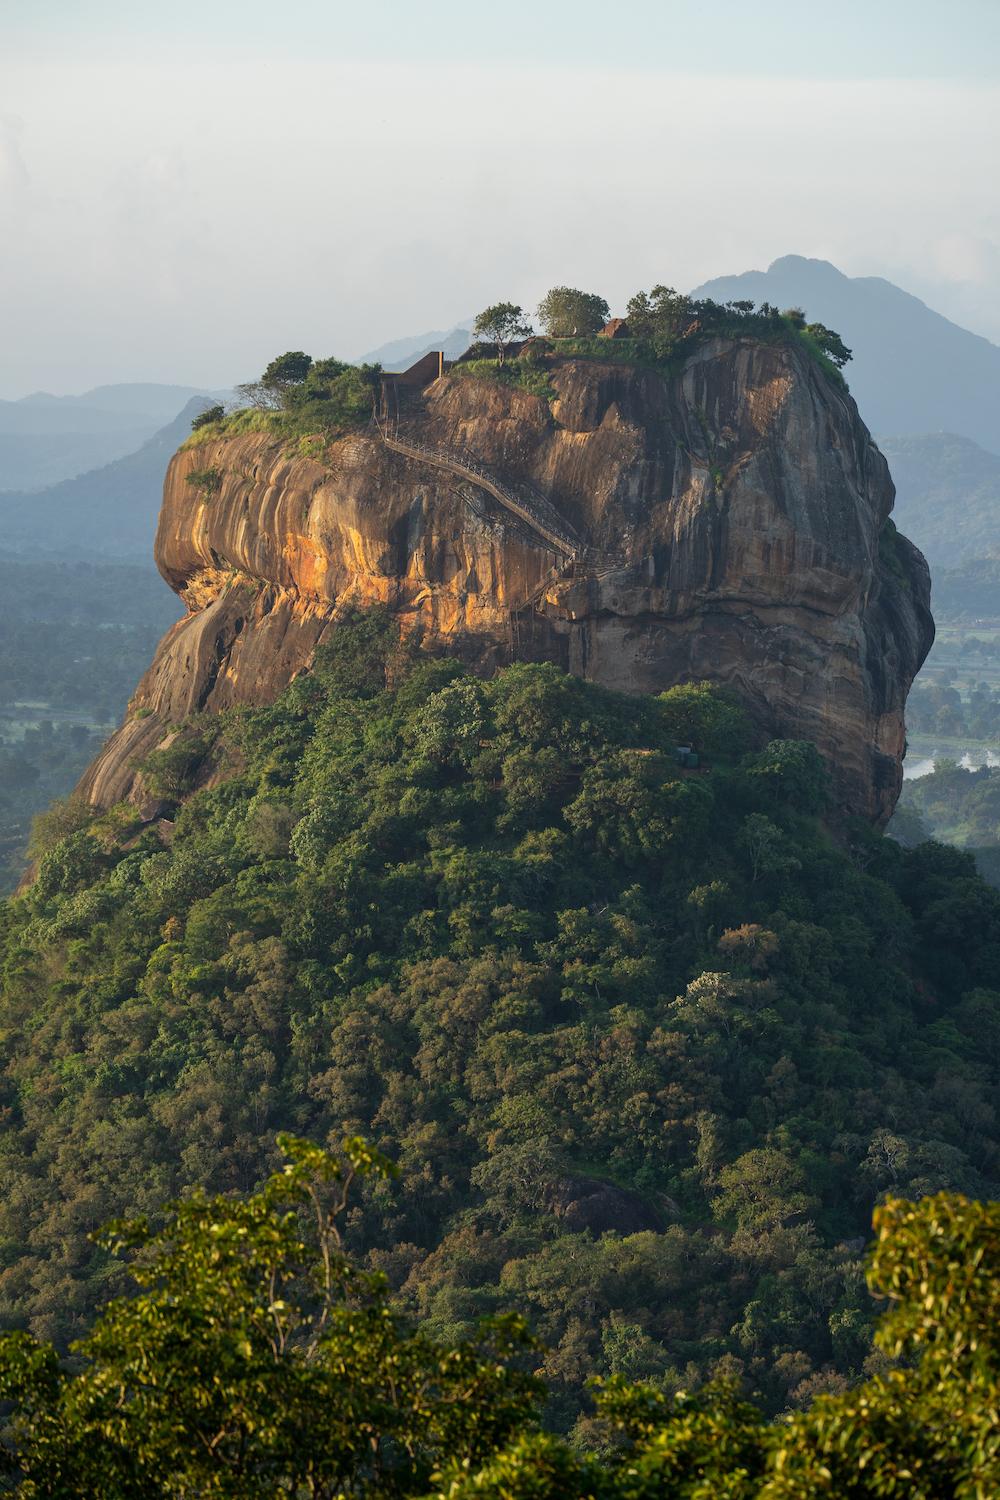 Sigiriya or the Lion Rock, an ancient fortress and a palace with gardens, pools, and terraces atop of granite rock in Sri Lanka. (Huey Min/Shutterstock)